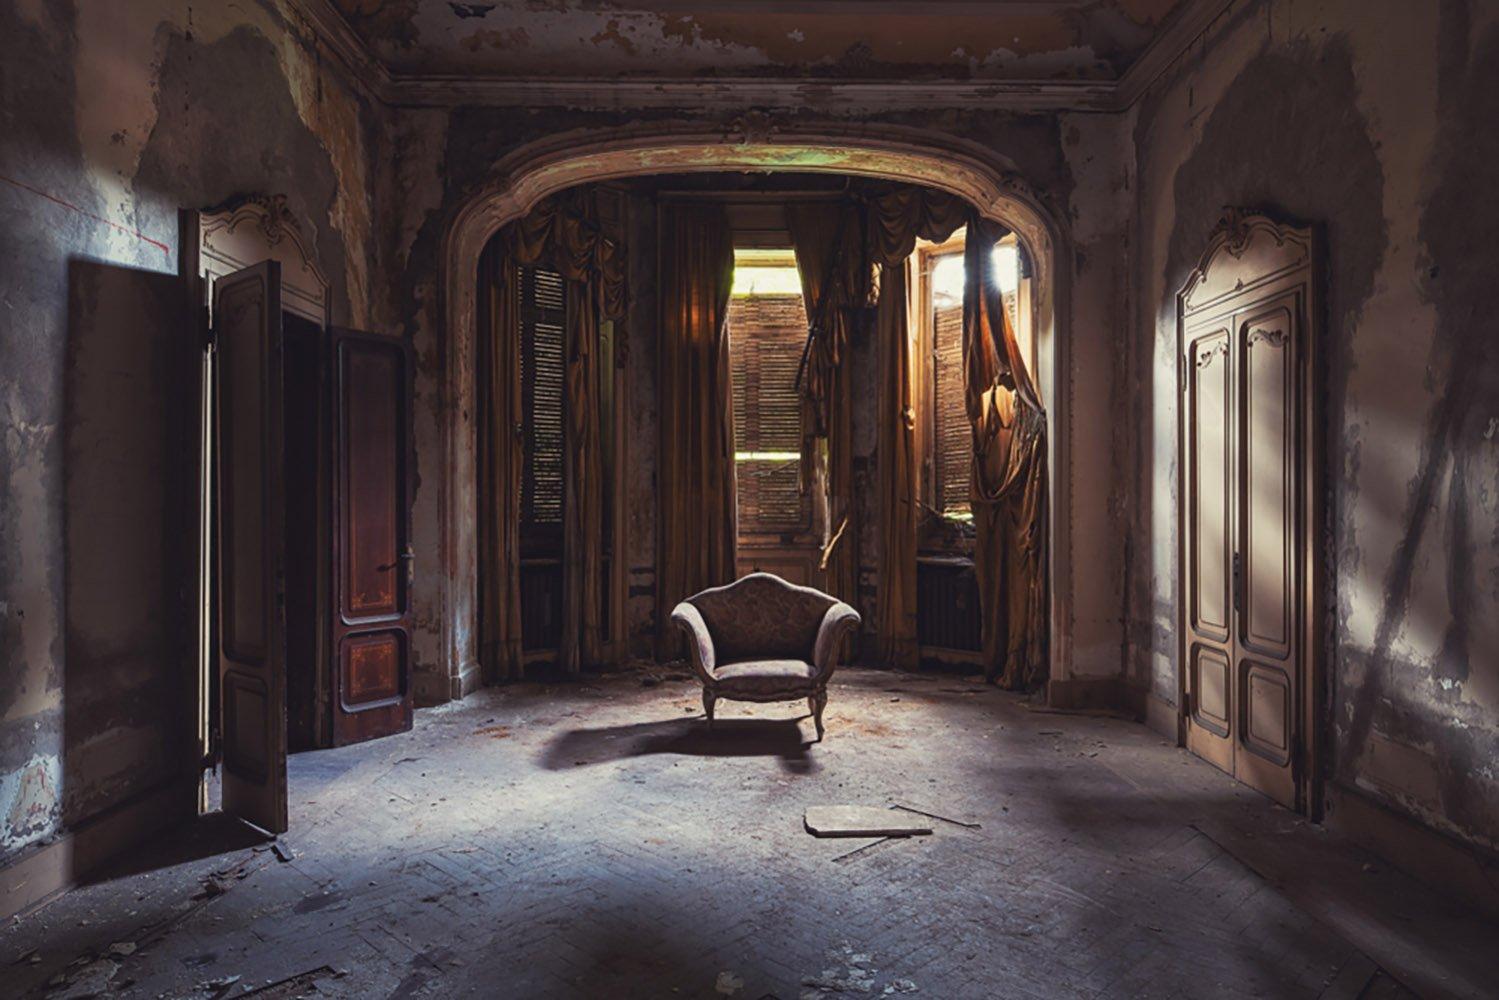 Isolamento is a limited-edition photograph by British contemporary artist Gina Soden from the “How Long Is Now?” series. It was taken in an abandoned villa on the site of a huge factory in Italy, where the owner of the factory lived.
Prints are